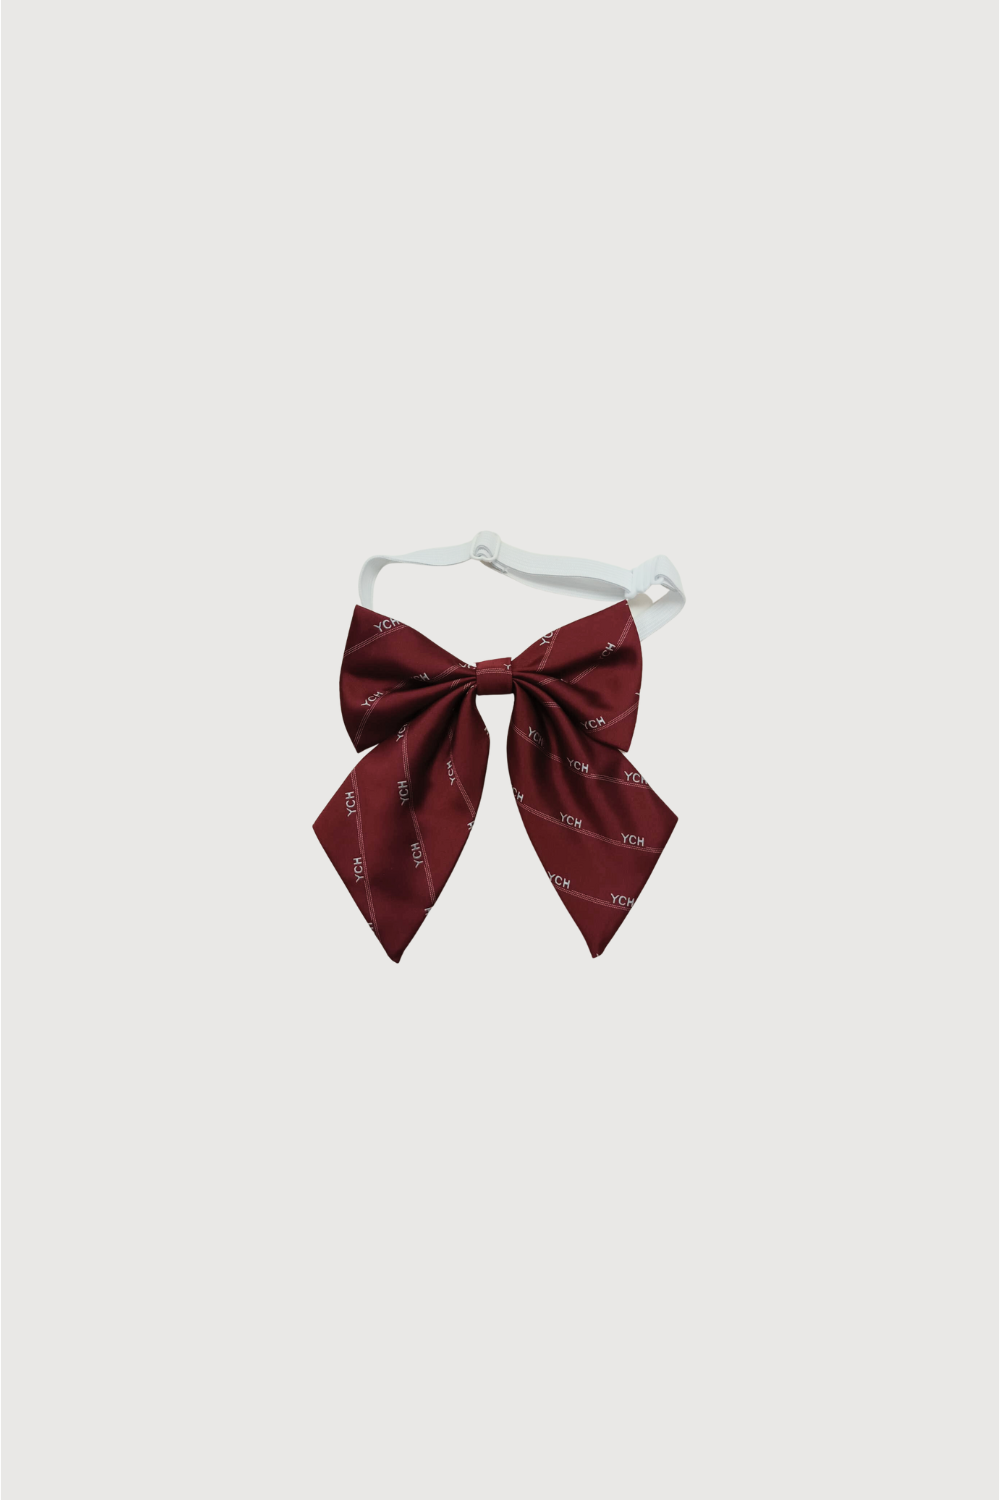 <b>YCHCHT</b> AW Girl's Bow Tie (BOW0001)